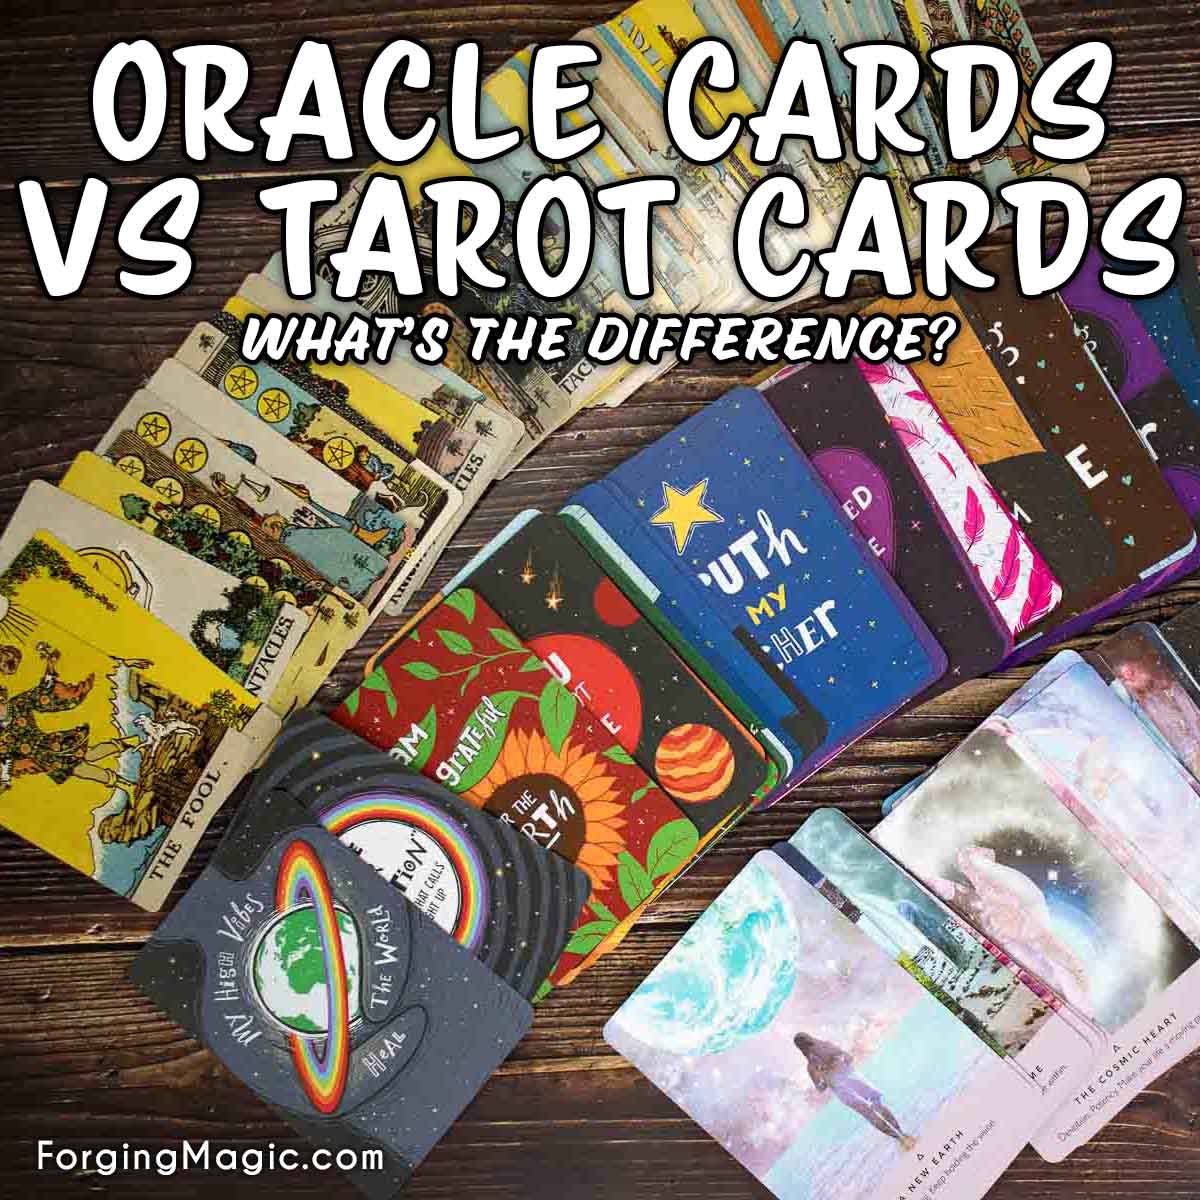 Oracle cards vs Tarot cards, what's the difference?